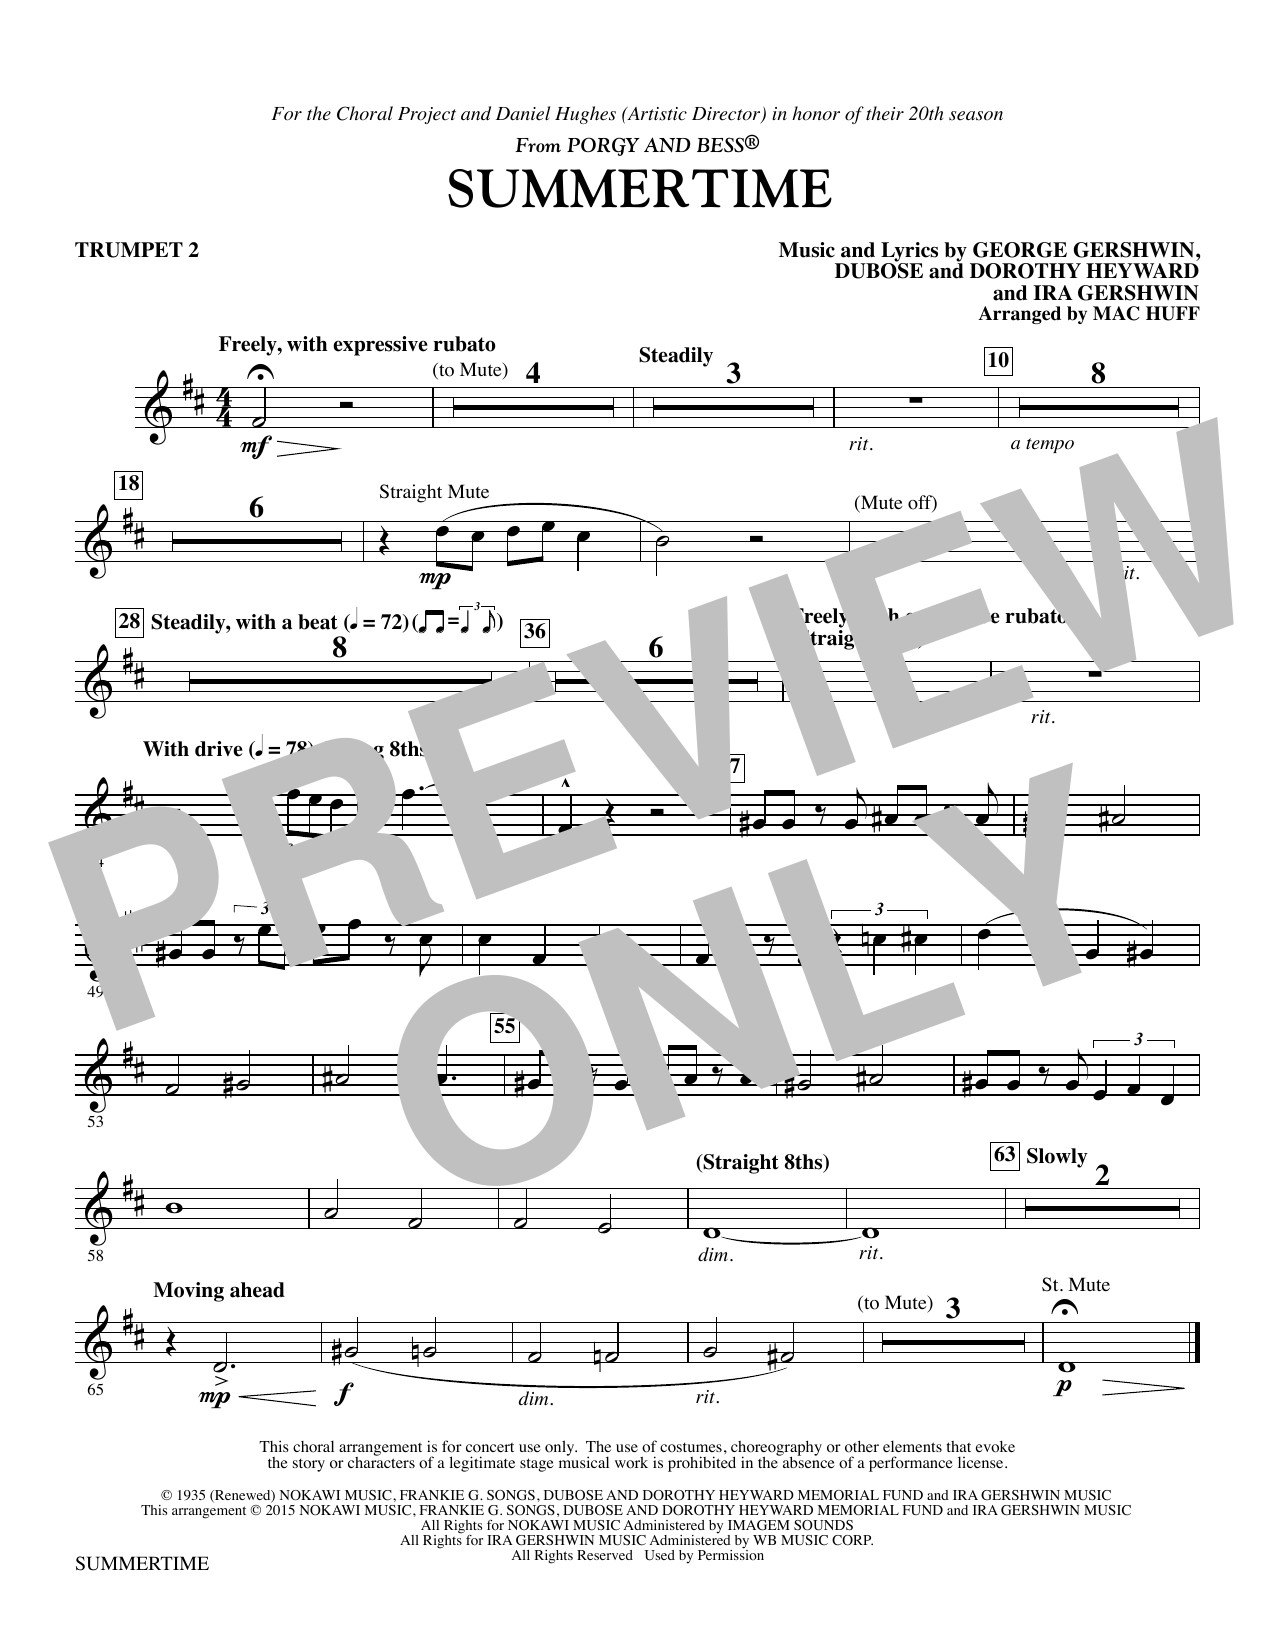 George Gershwin Summertime - Trumpet 2 sheet music notes and chords. Download Printable PDF.